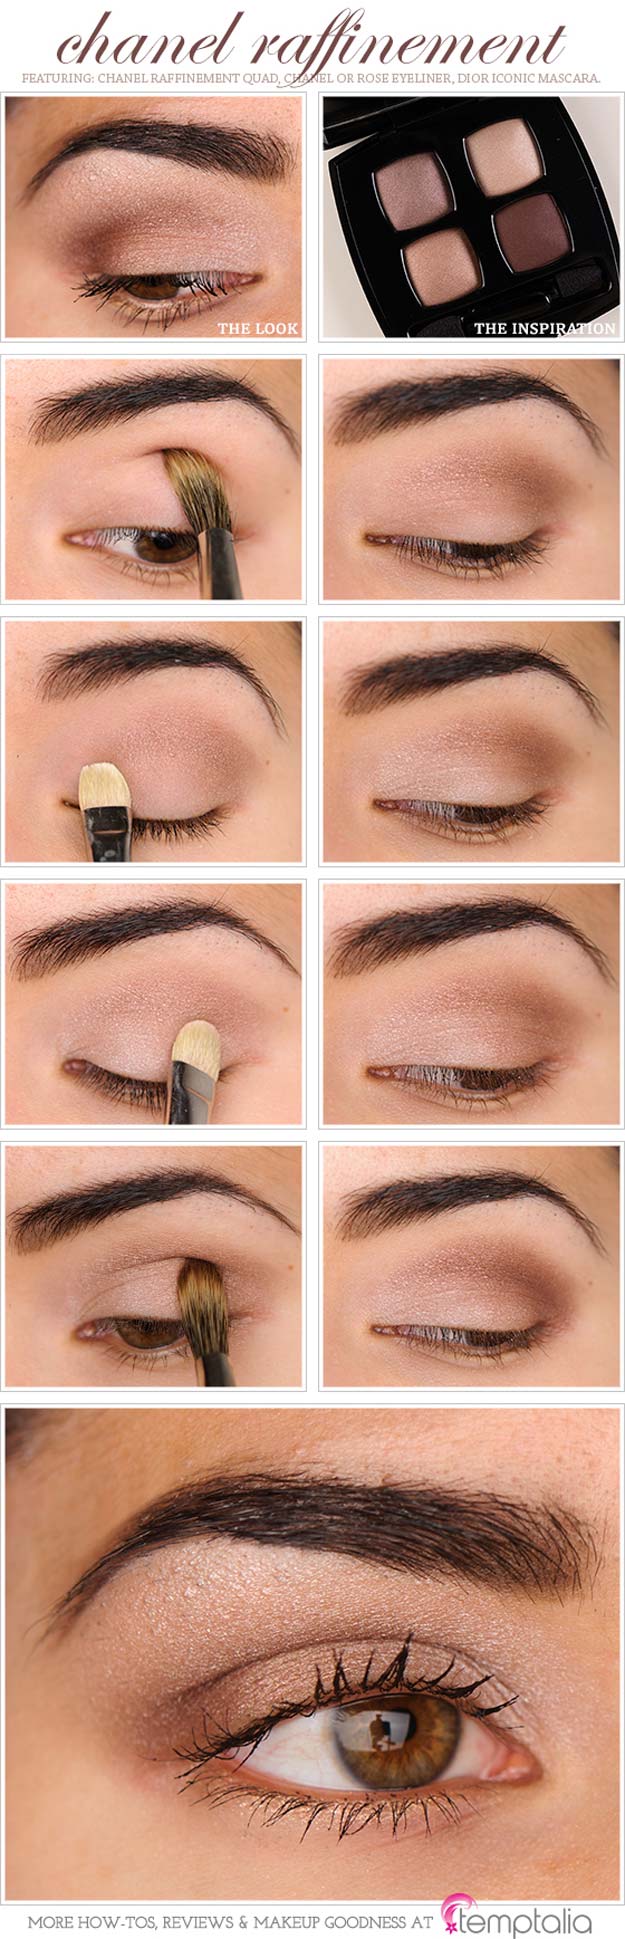 Best Eyeshadow Tutorials - Channel Refinement - Easy Step by Step How To For Eye Shadow - Cool Makeup Tricks and Eye Makeup Tutorial With Instructions - Quick Ways to Do Smoky Eye, Natural Makeup, Looks for Day and Evening, Brown and Blue Eyes - Cool Ideas for Beginners and Teens 